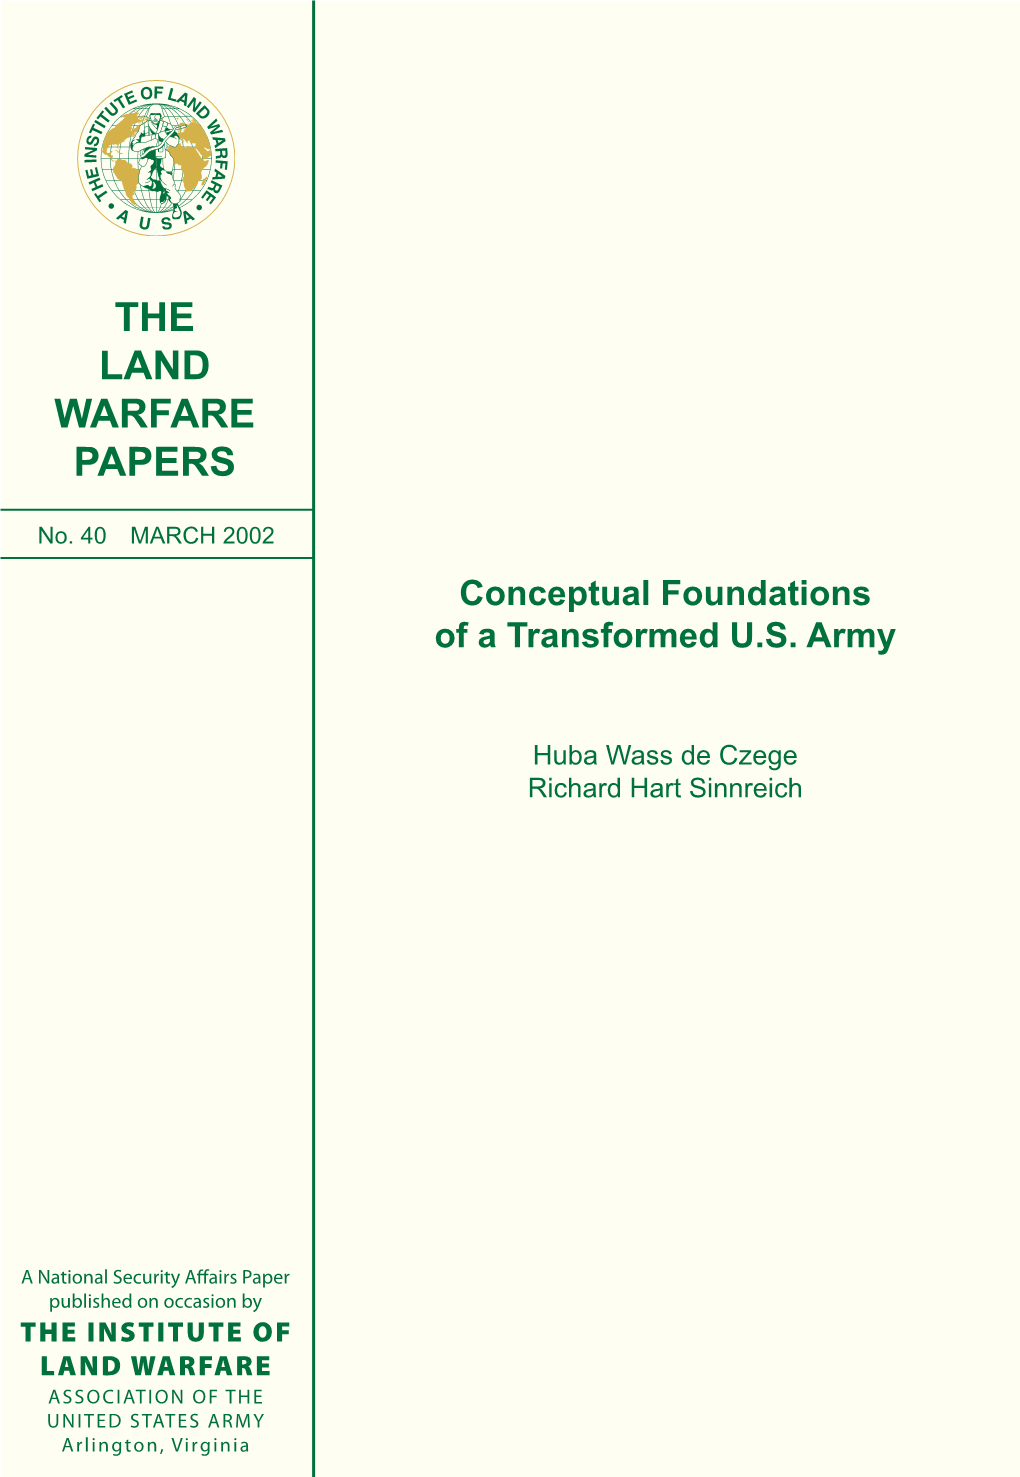 Conceptual Foundations of a Transformed U.S. Army